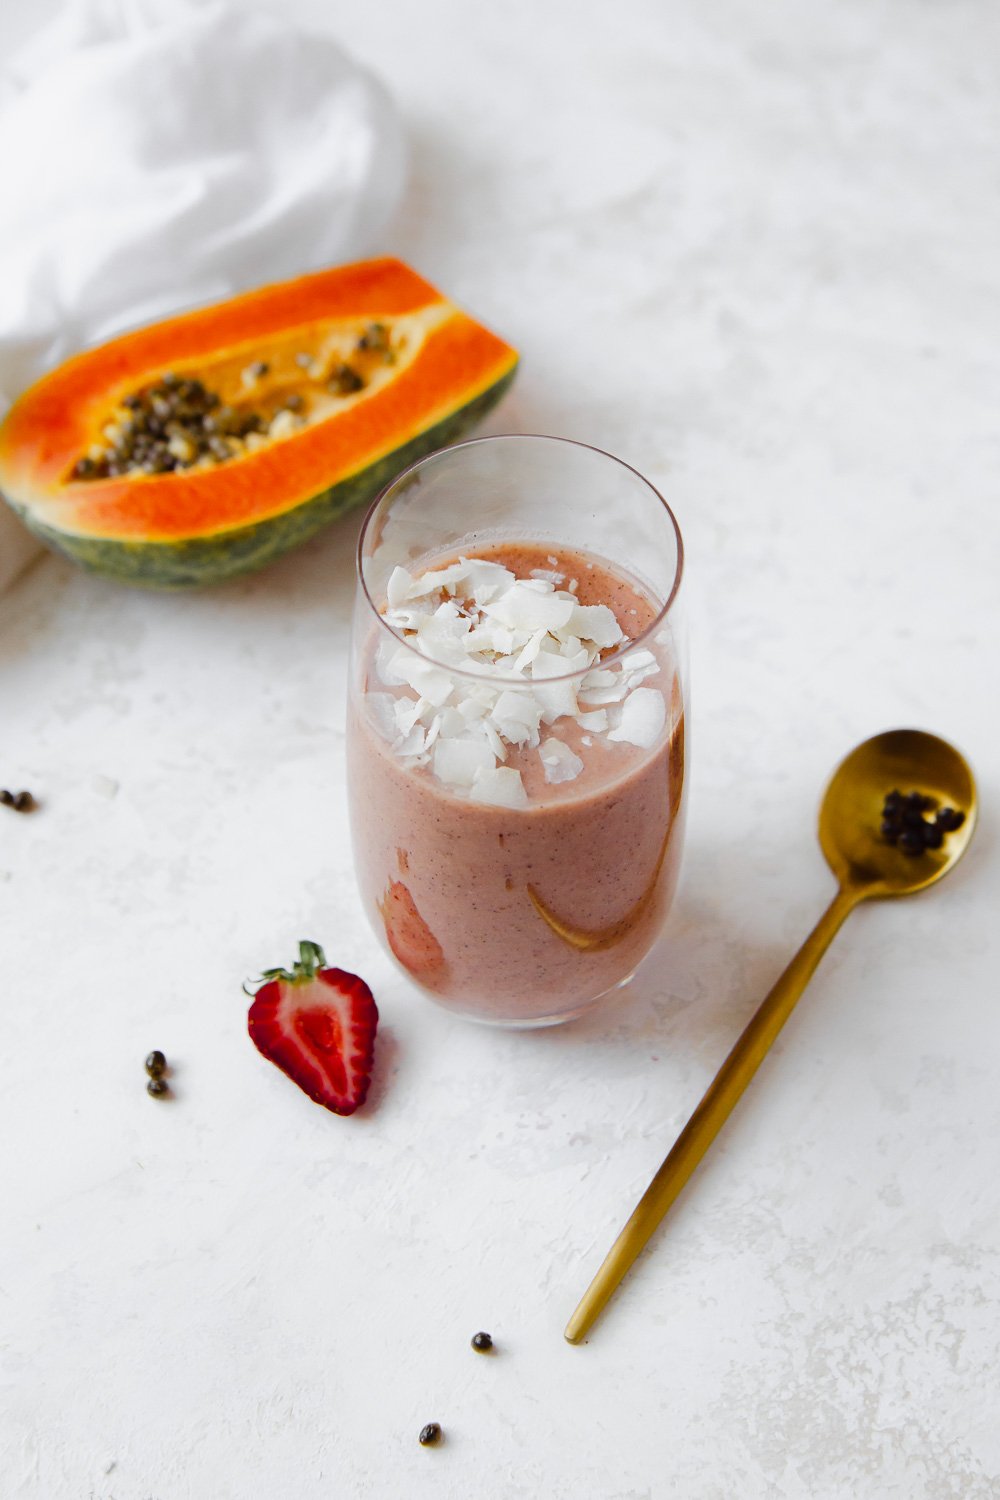 Papaya and strawberry smoothie topped with coconut flakes placed next to a gold spoon, strawberry and half of a papaya.